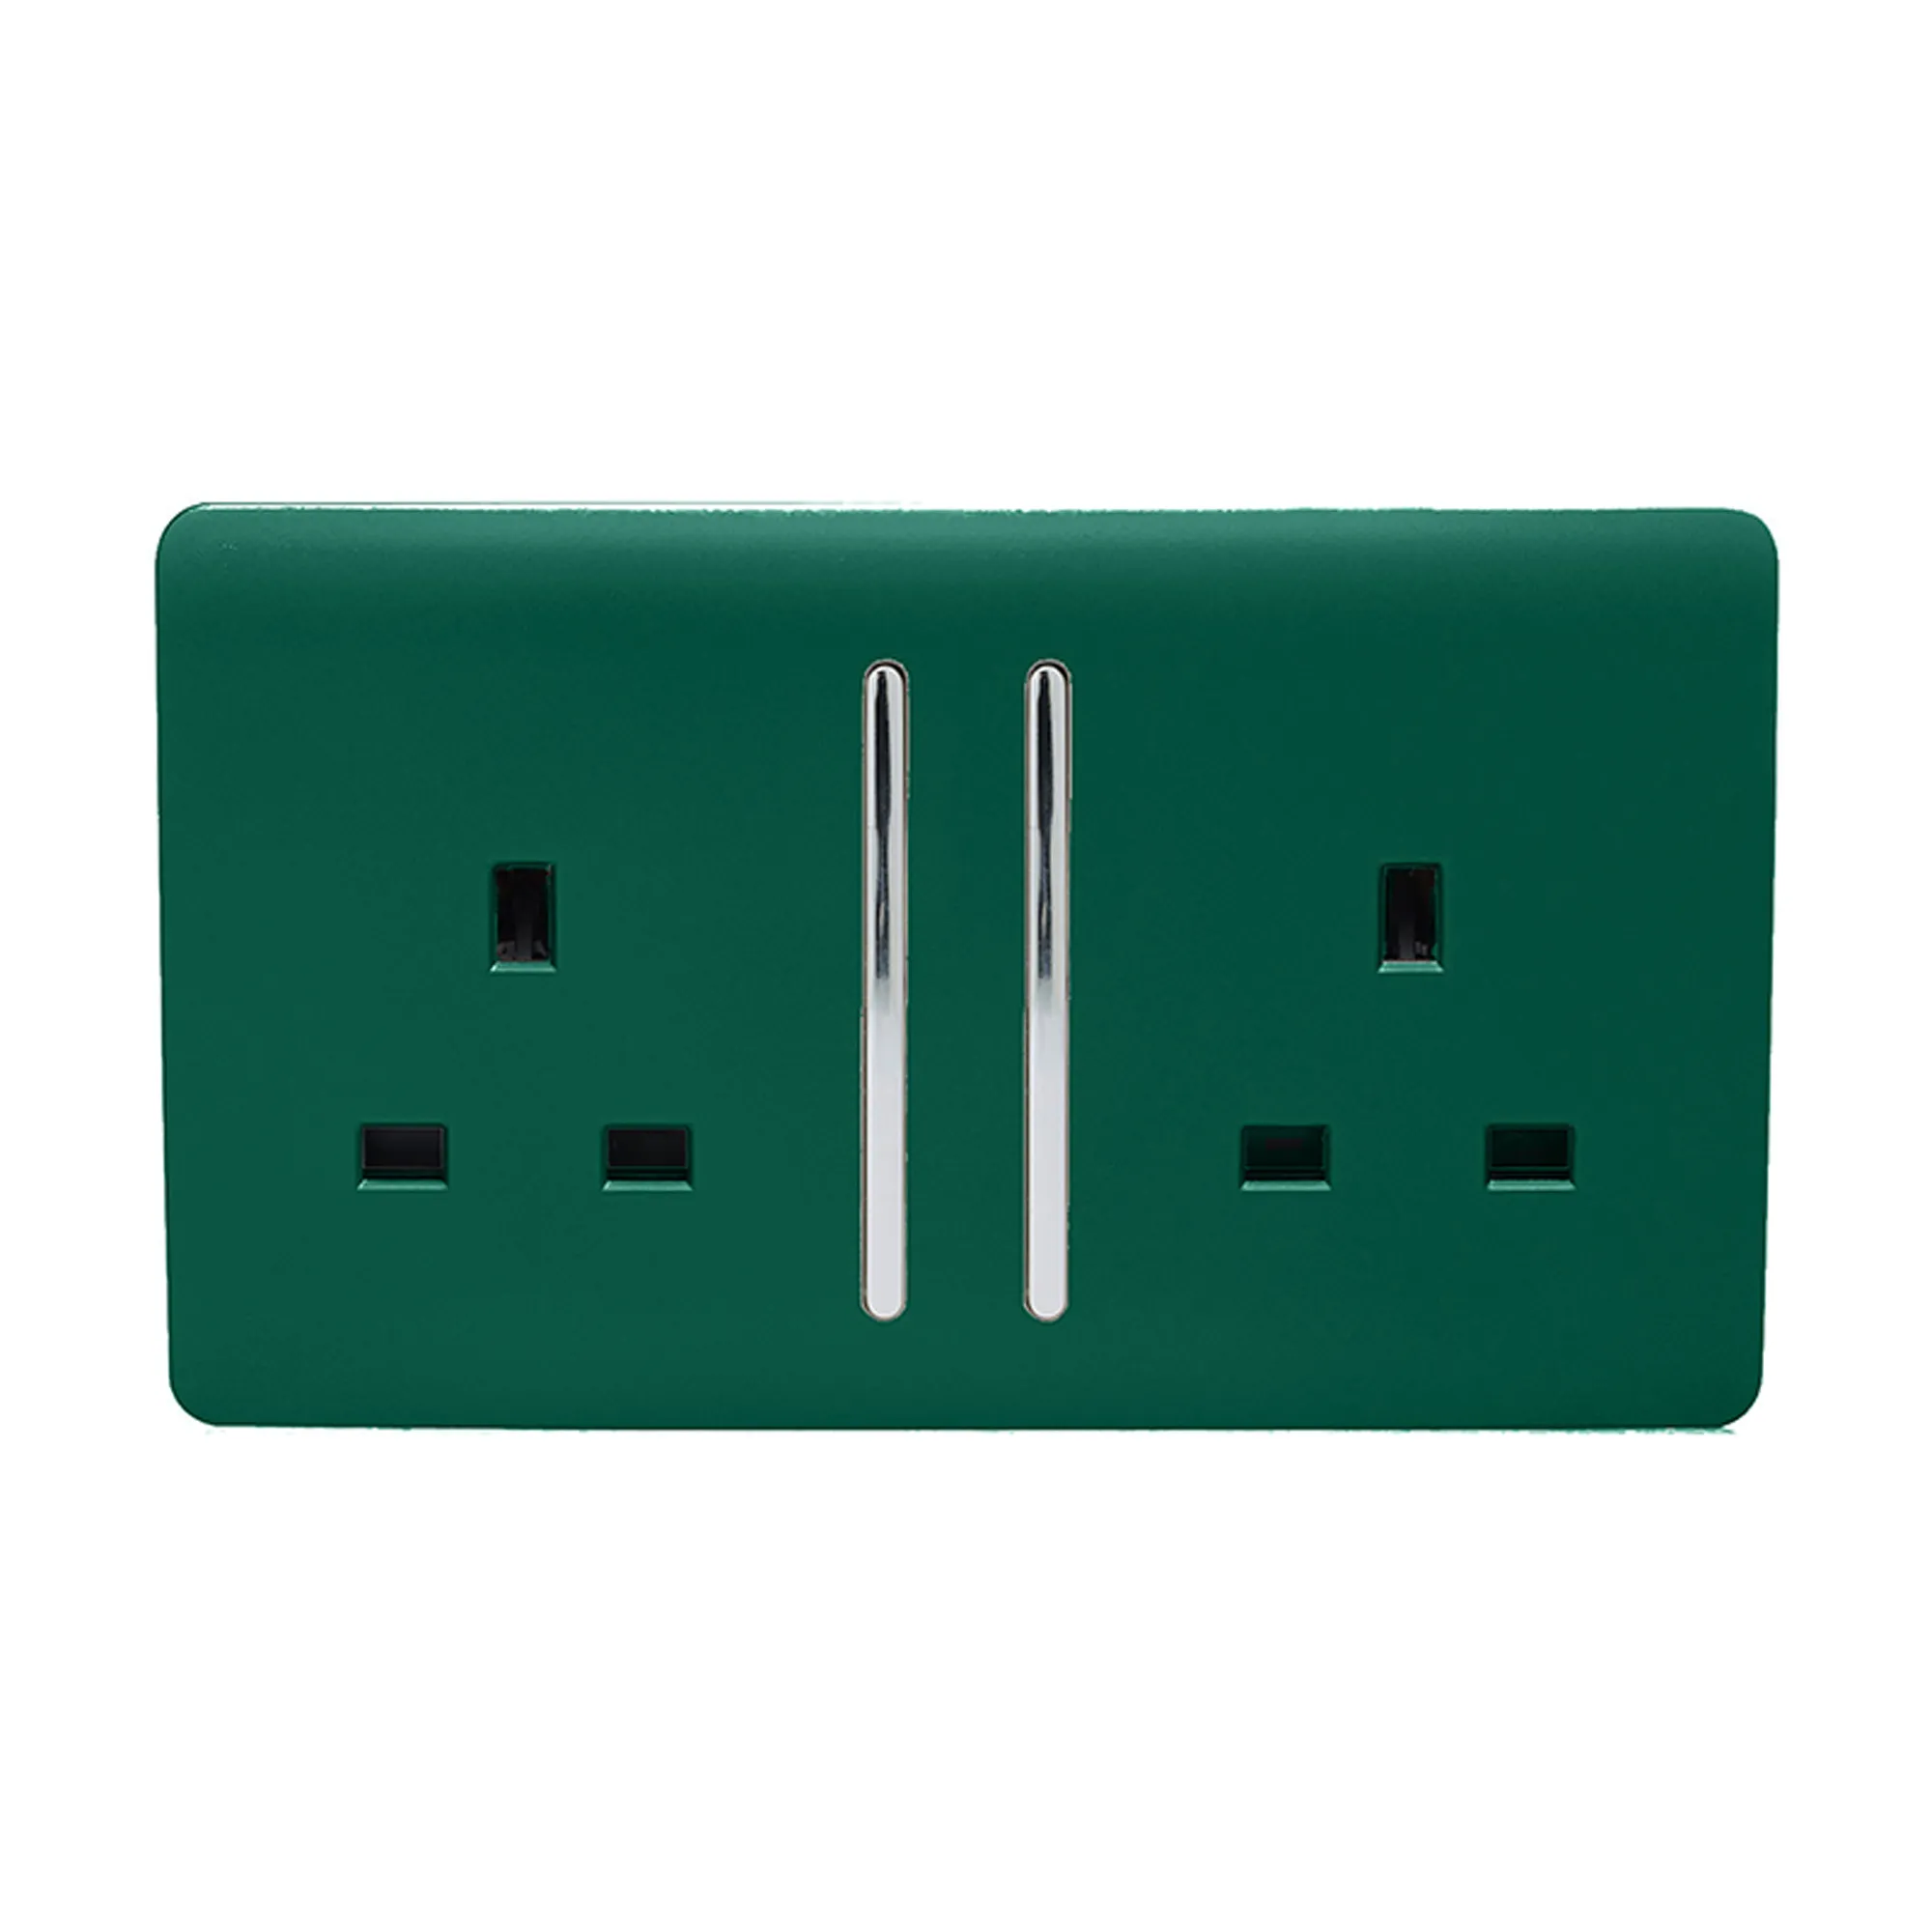 2 Gang 13Amp Long Switched Double Socket Dark Green